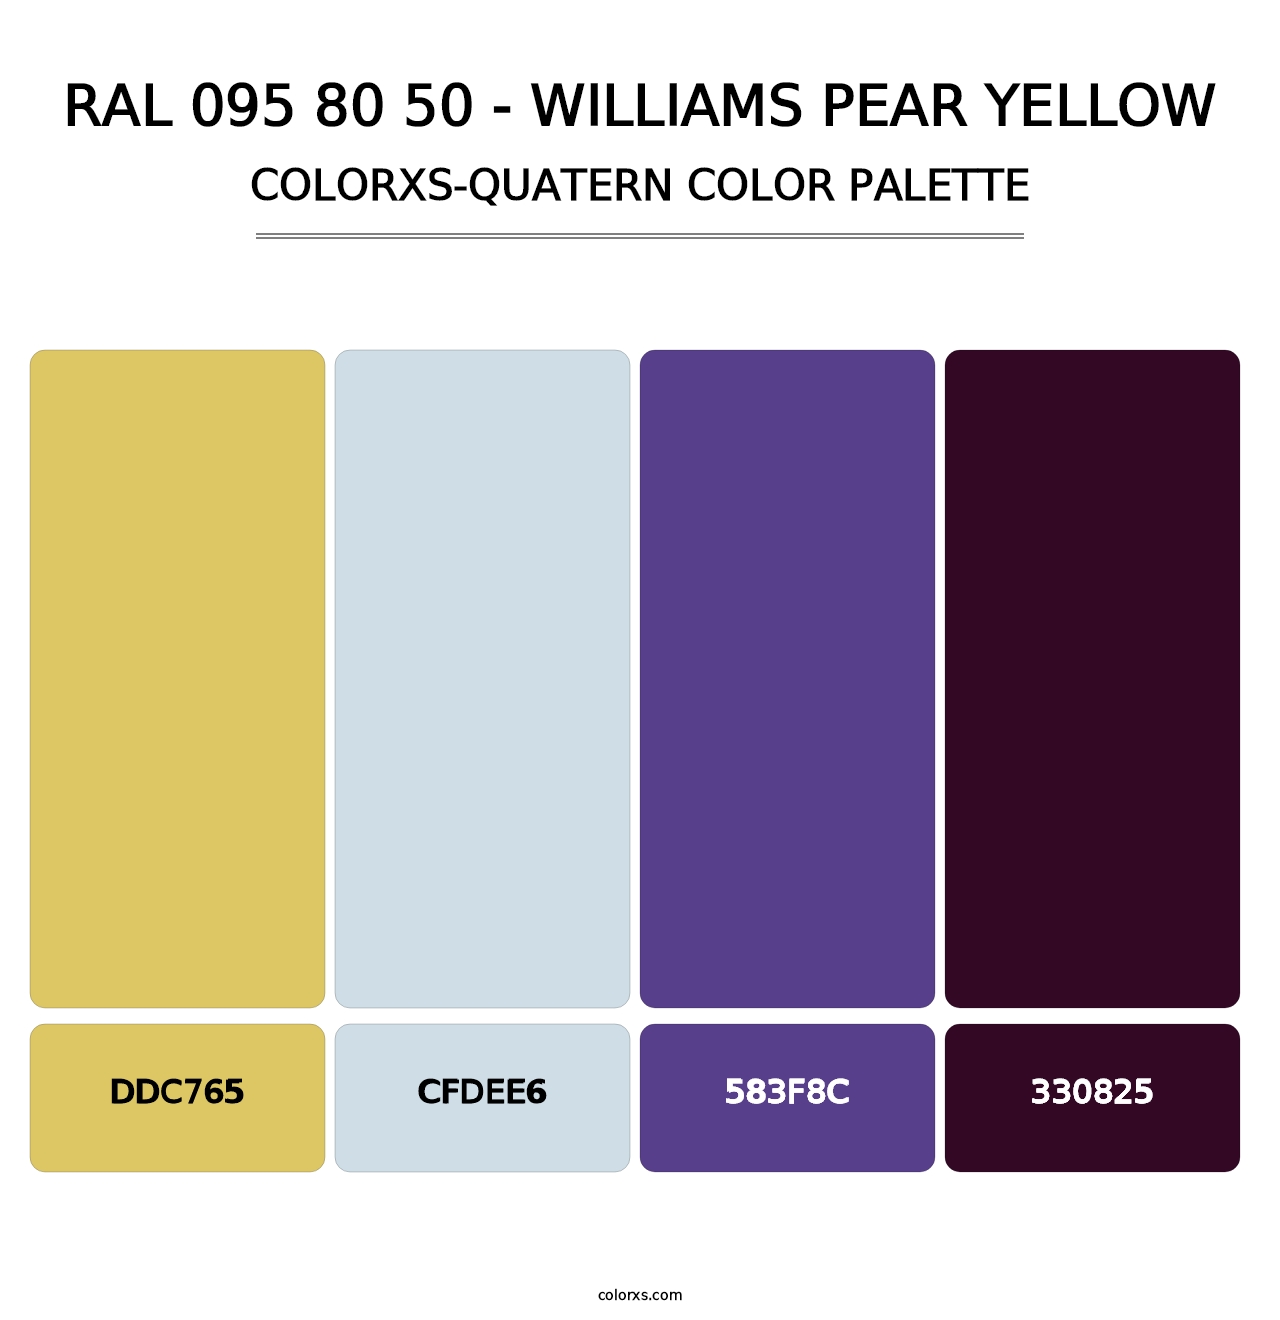 RAL 095 80 50 - Williams Pear Yellow - Colorxs Quatern Palette